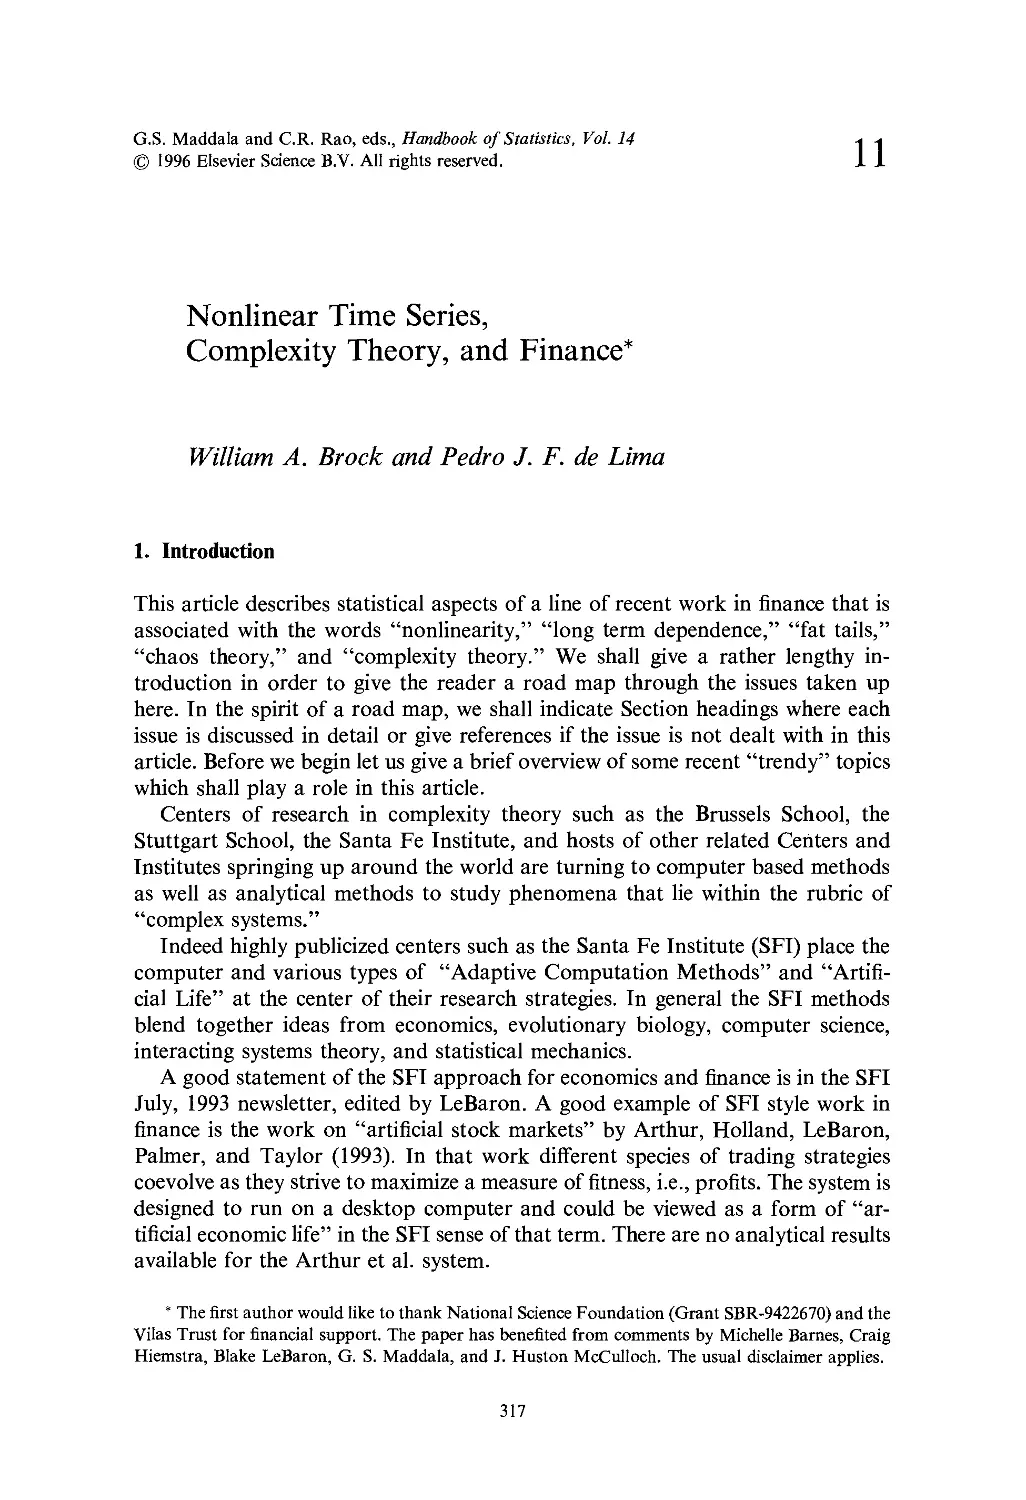 11. Nonlinear Time Series, Complexity Theory, and Finance